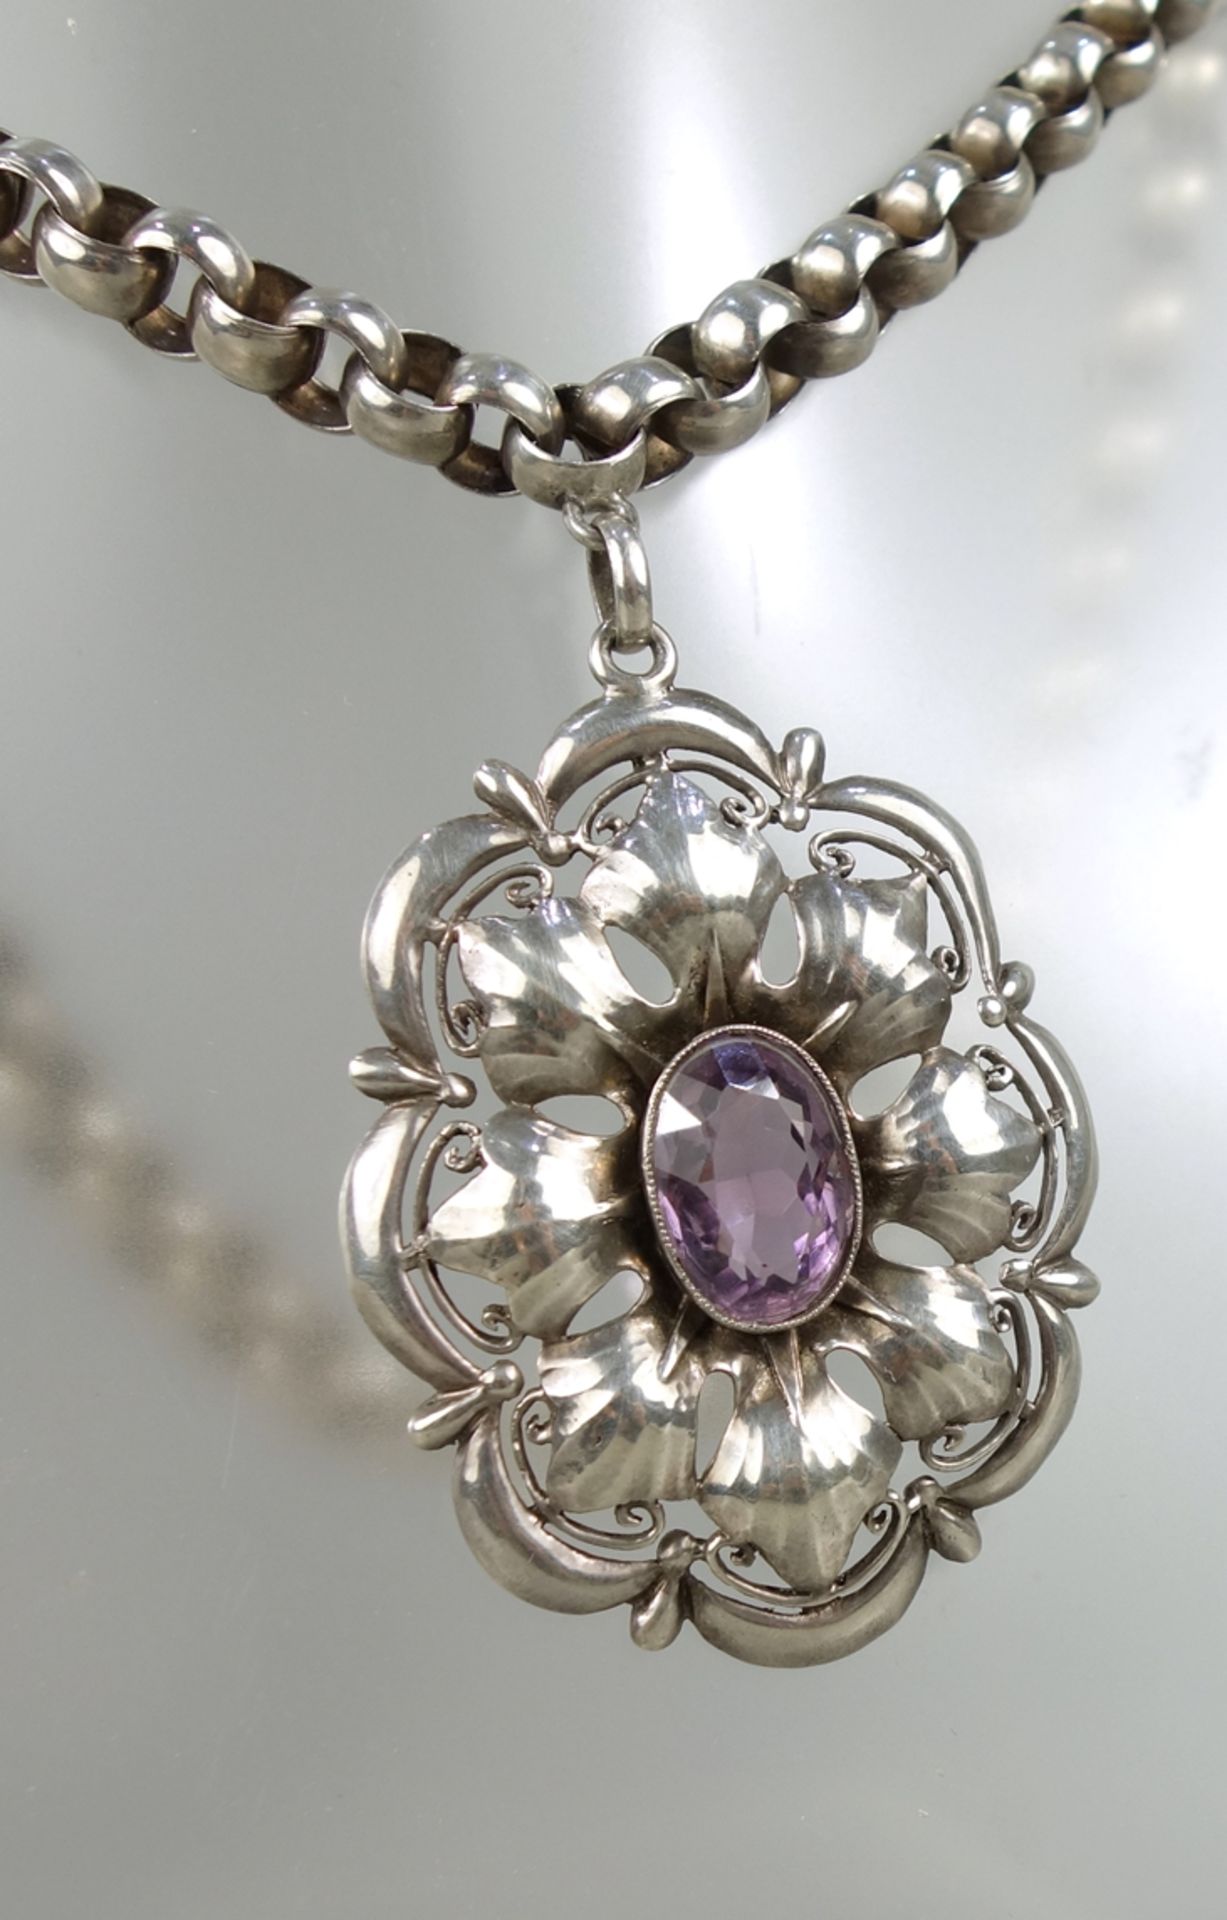 large pendant with amethyst, 935 silver, Theodor Fahrner, c.1920, wt.48,28g - Image 3 of 3